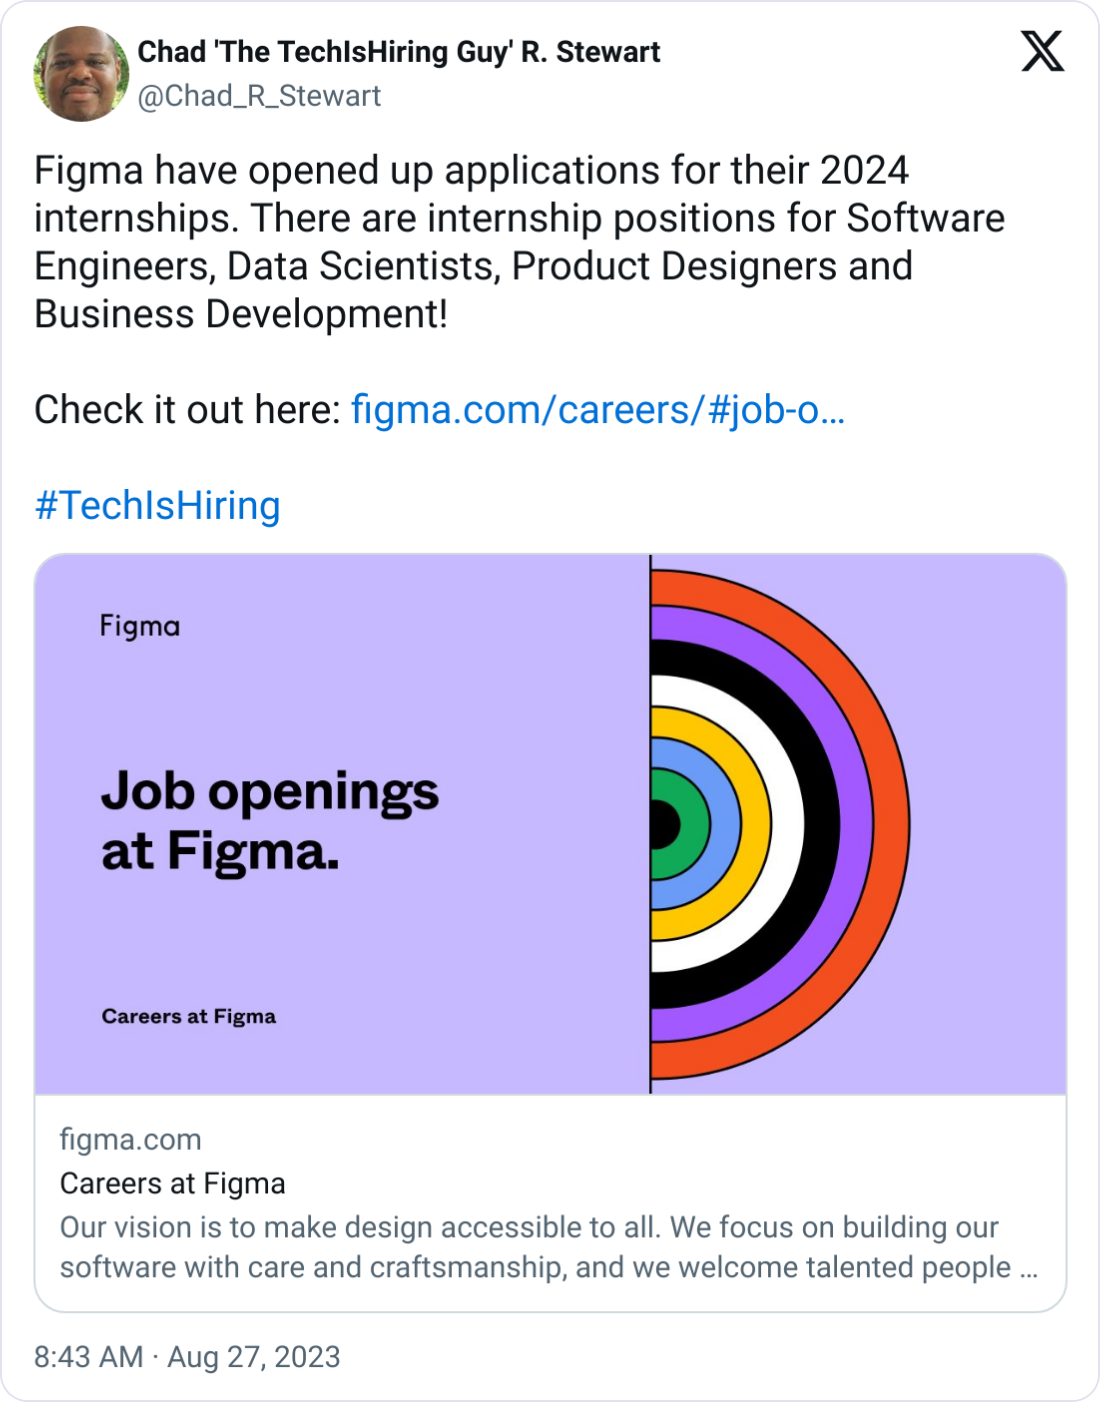  Chad 'The TechIsHiring Guy' R. Stewart @Chad_R_Stewart Figma have opened up applications for their 2024 internships. There are internship positions for Software Engineers, Data Scientists, Product Designers and Business Development!  Check it out here: https://figma.com/careers/#job-openings  #TechIsHiring